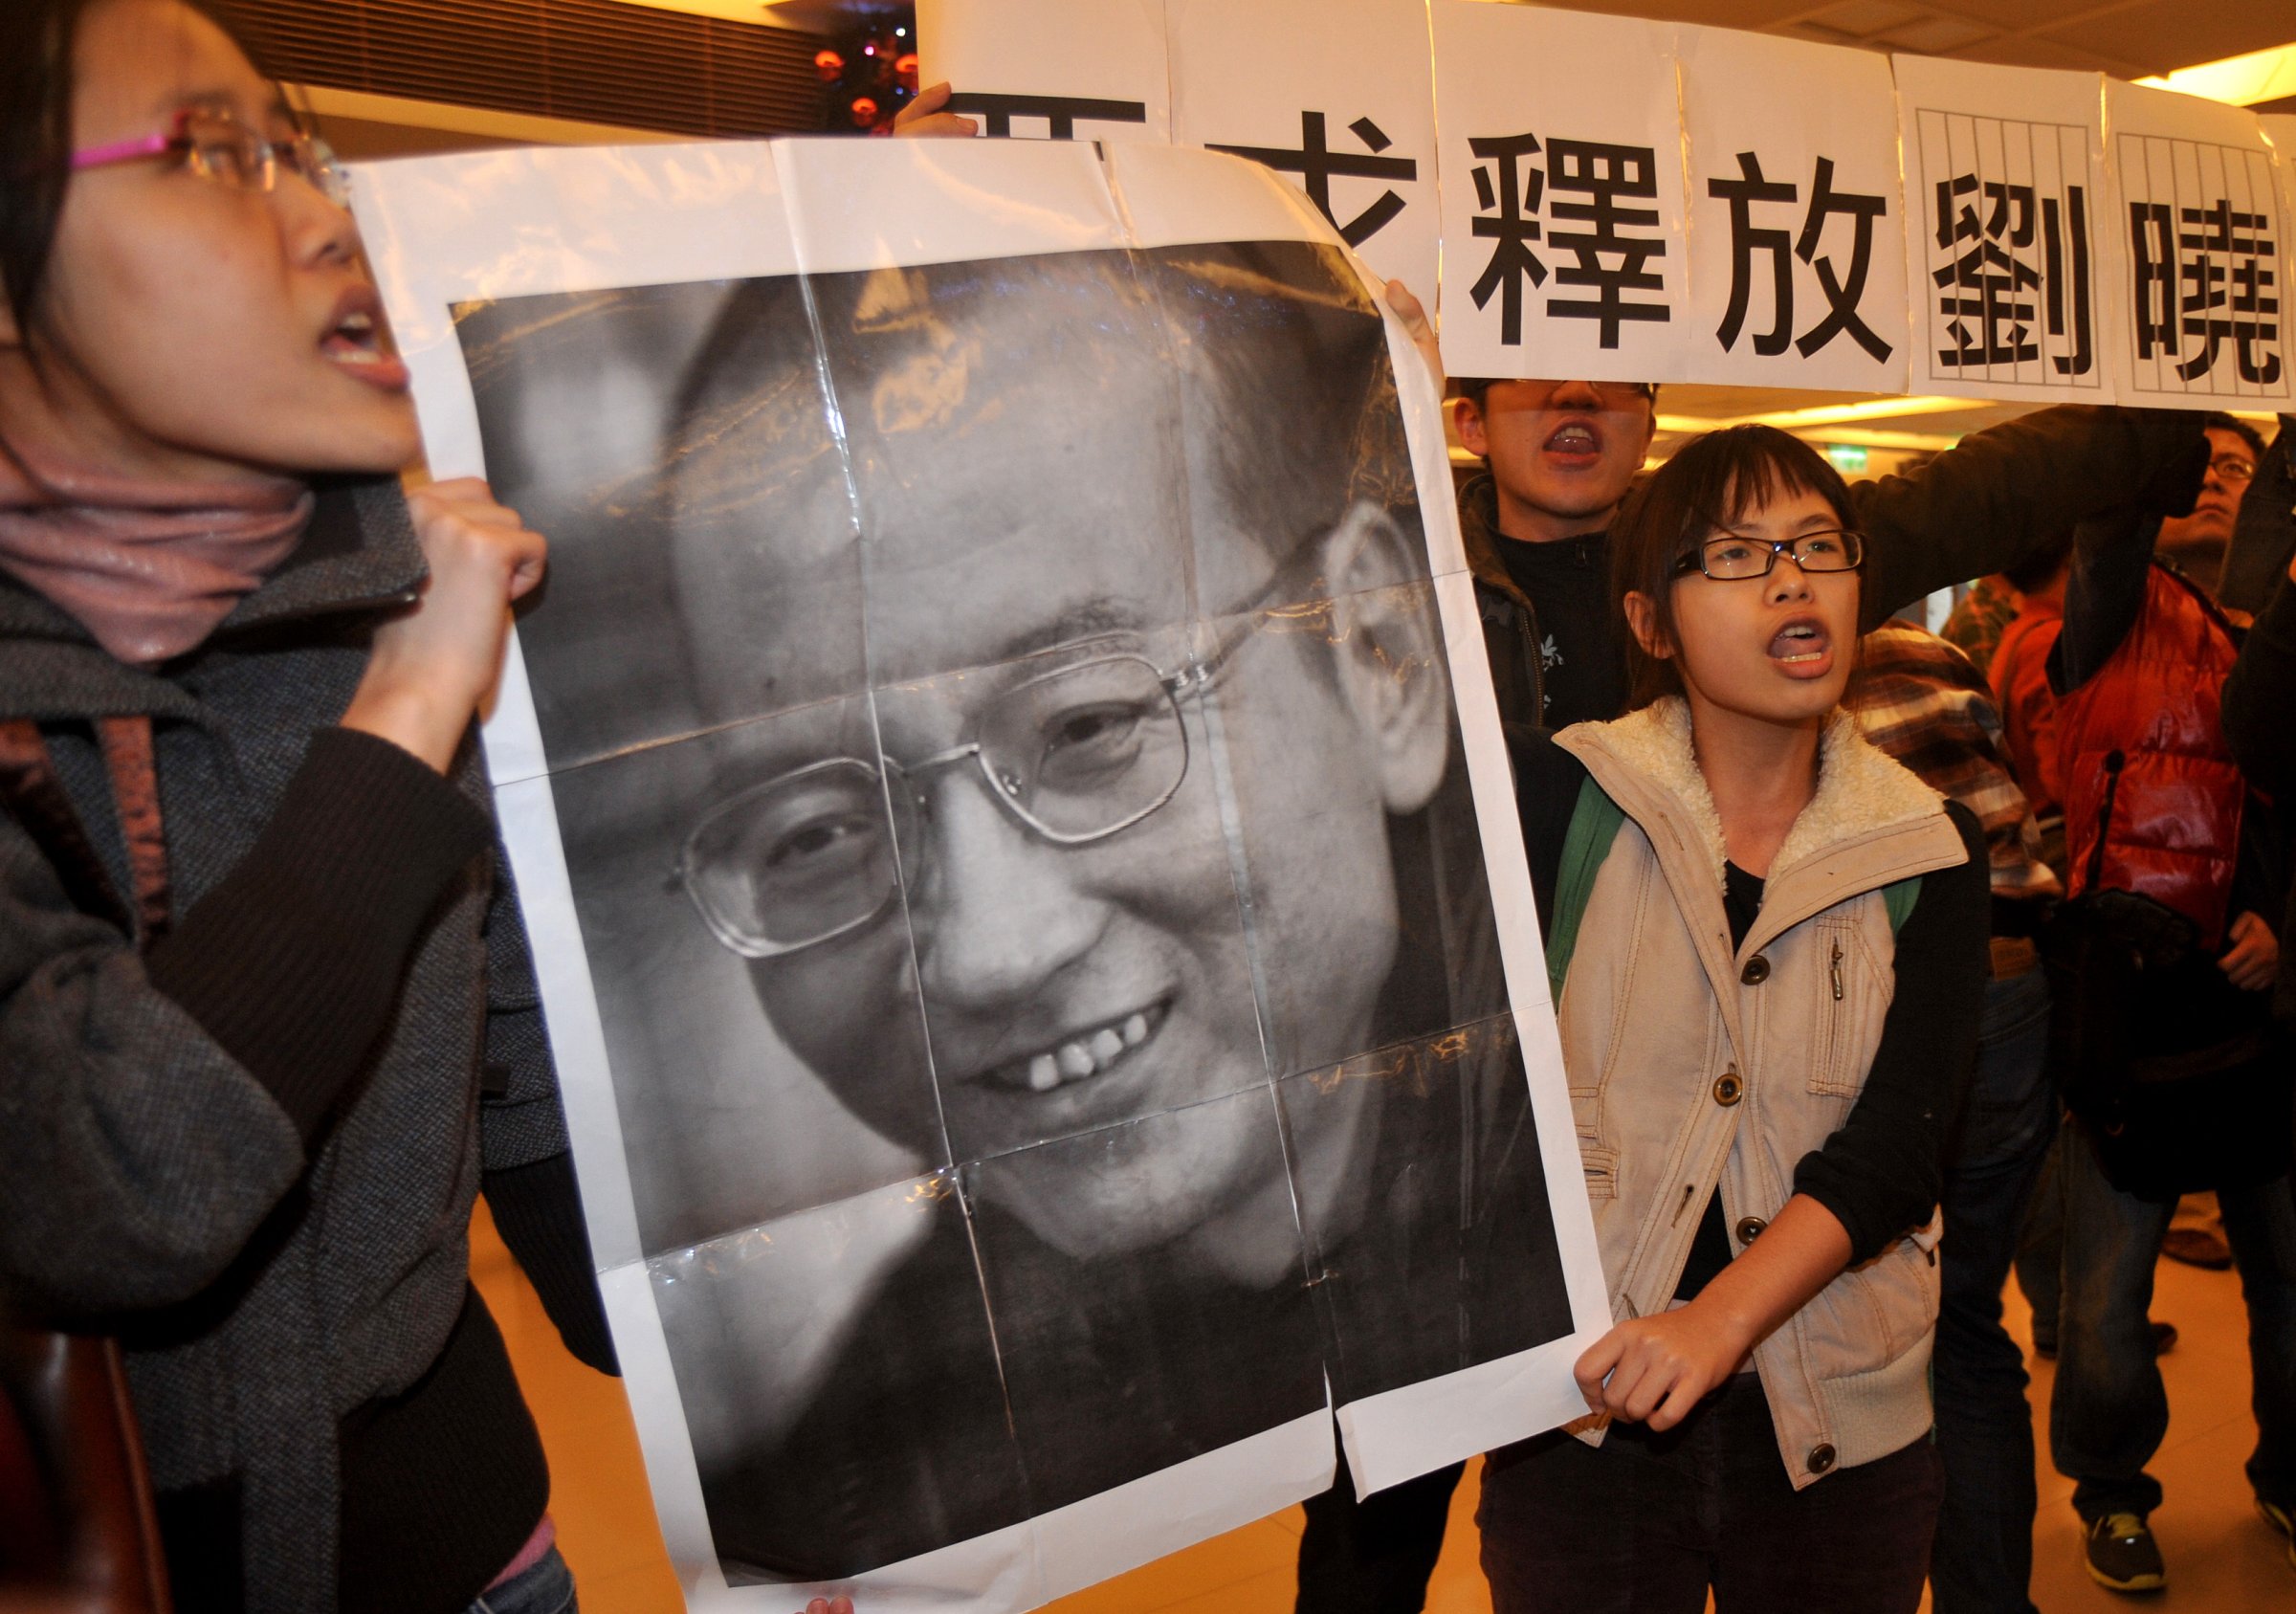 Demonstrators hold a portrait of China's